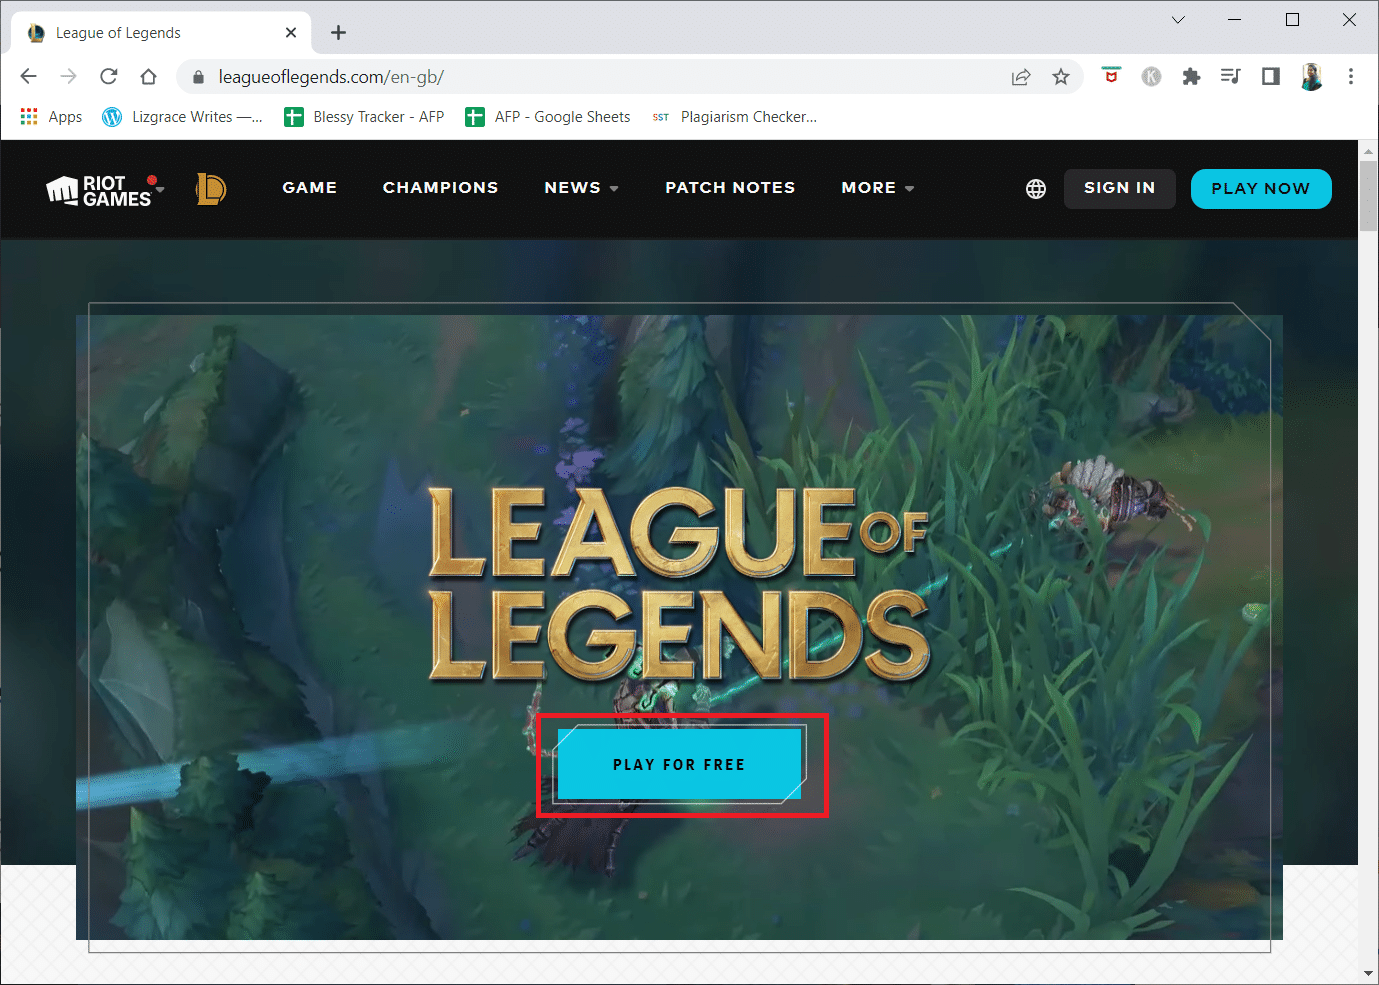 visit the League of Legends official website download page and click on the PLAY FOR FREE button